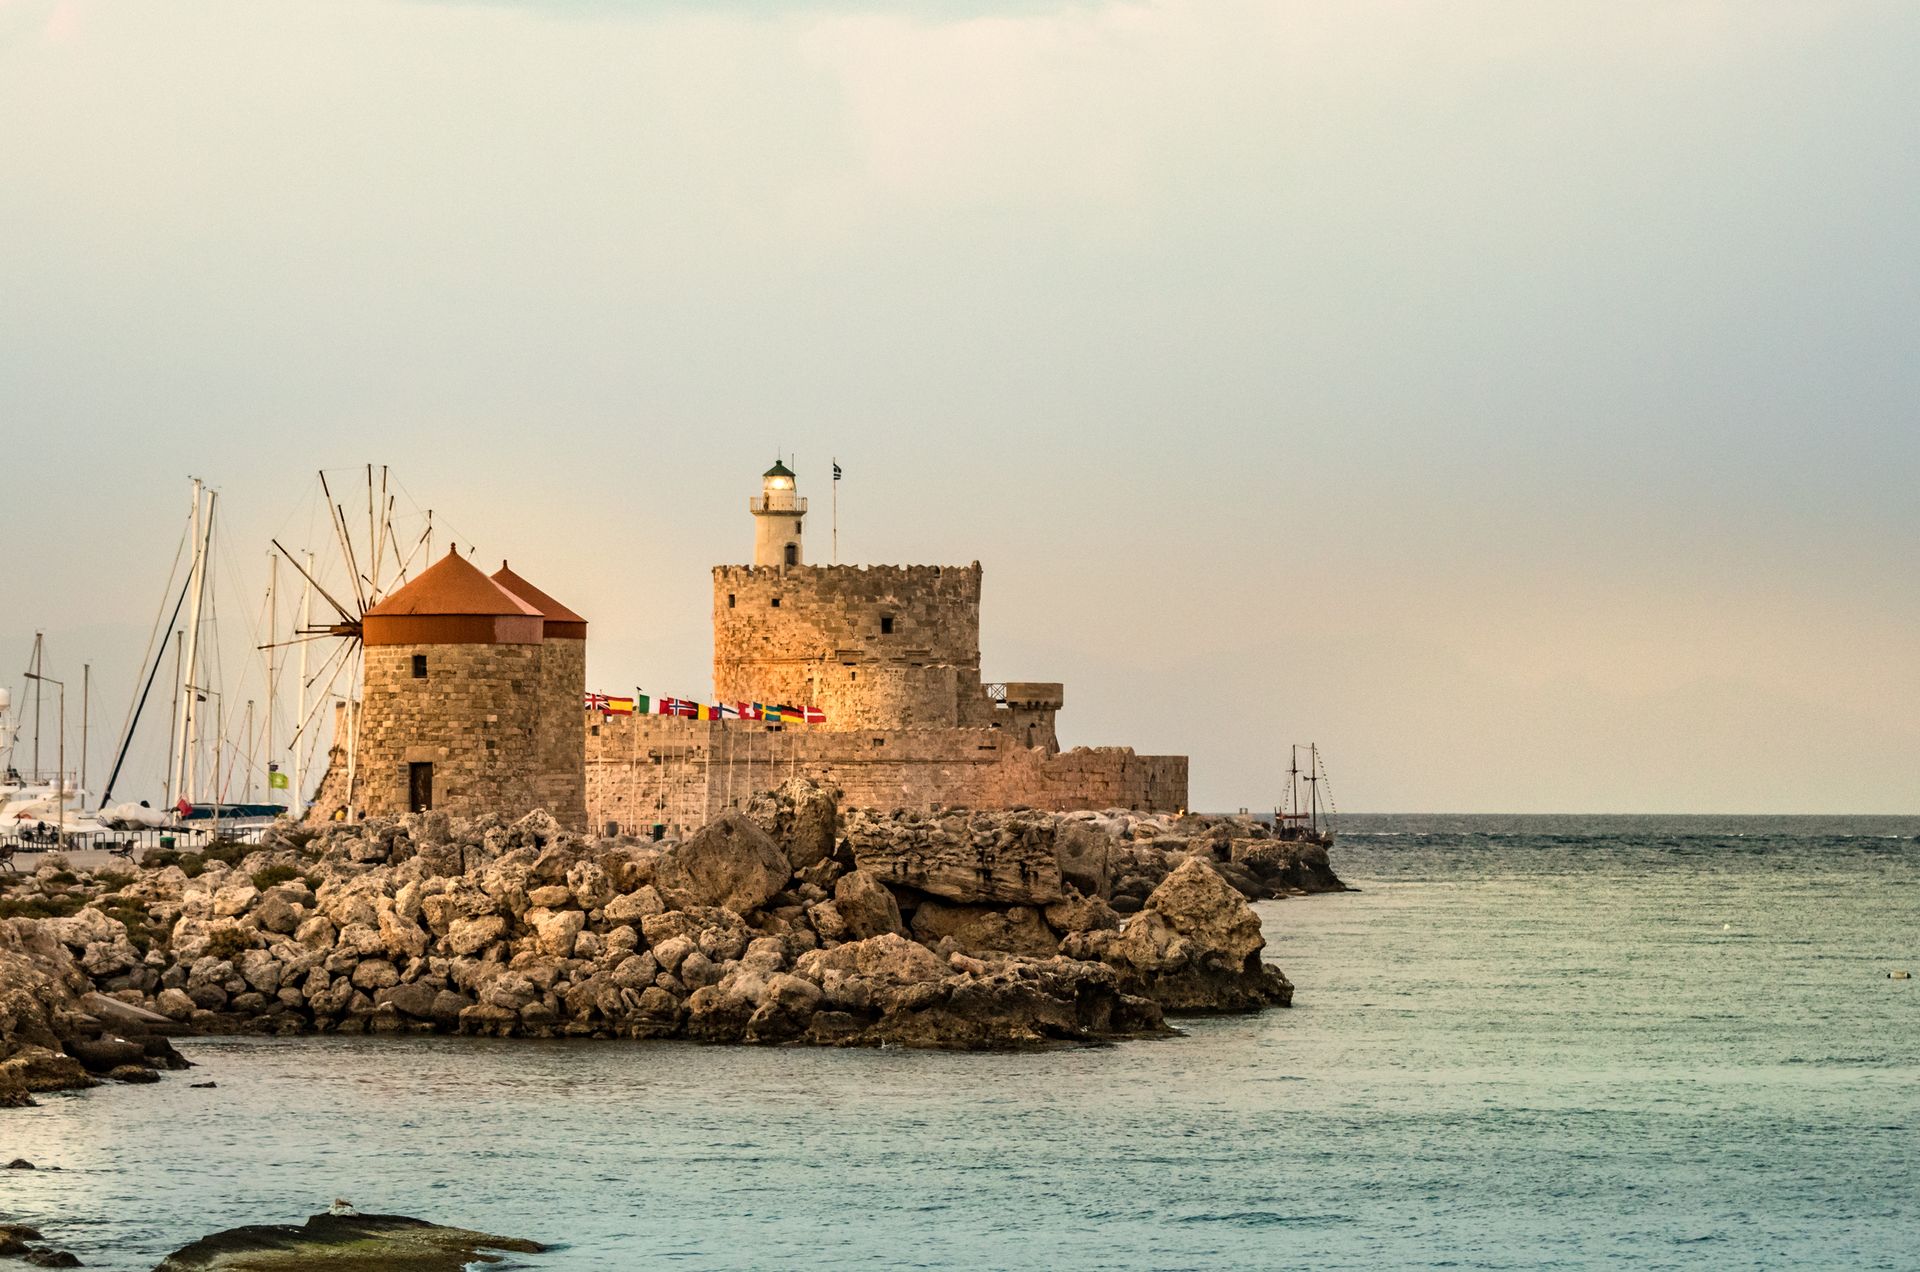 Windmills And The Lighthouse At Mandraki Harbour, Rhodes, Greece